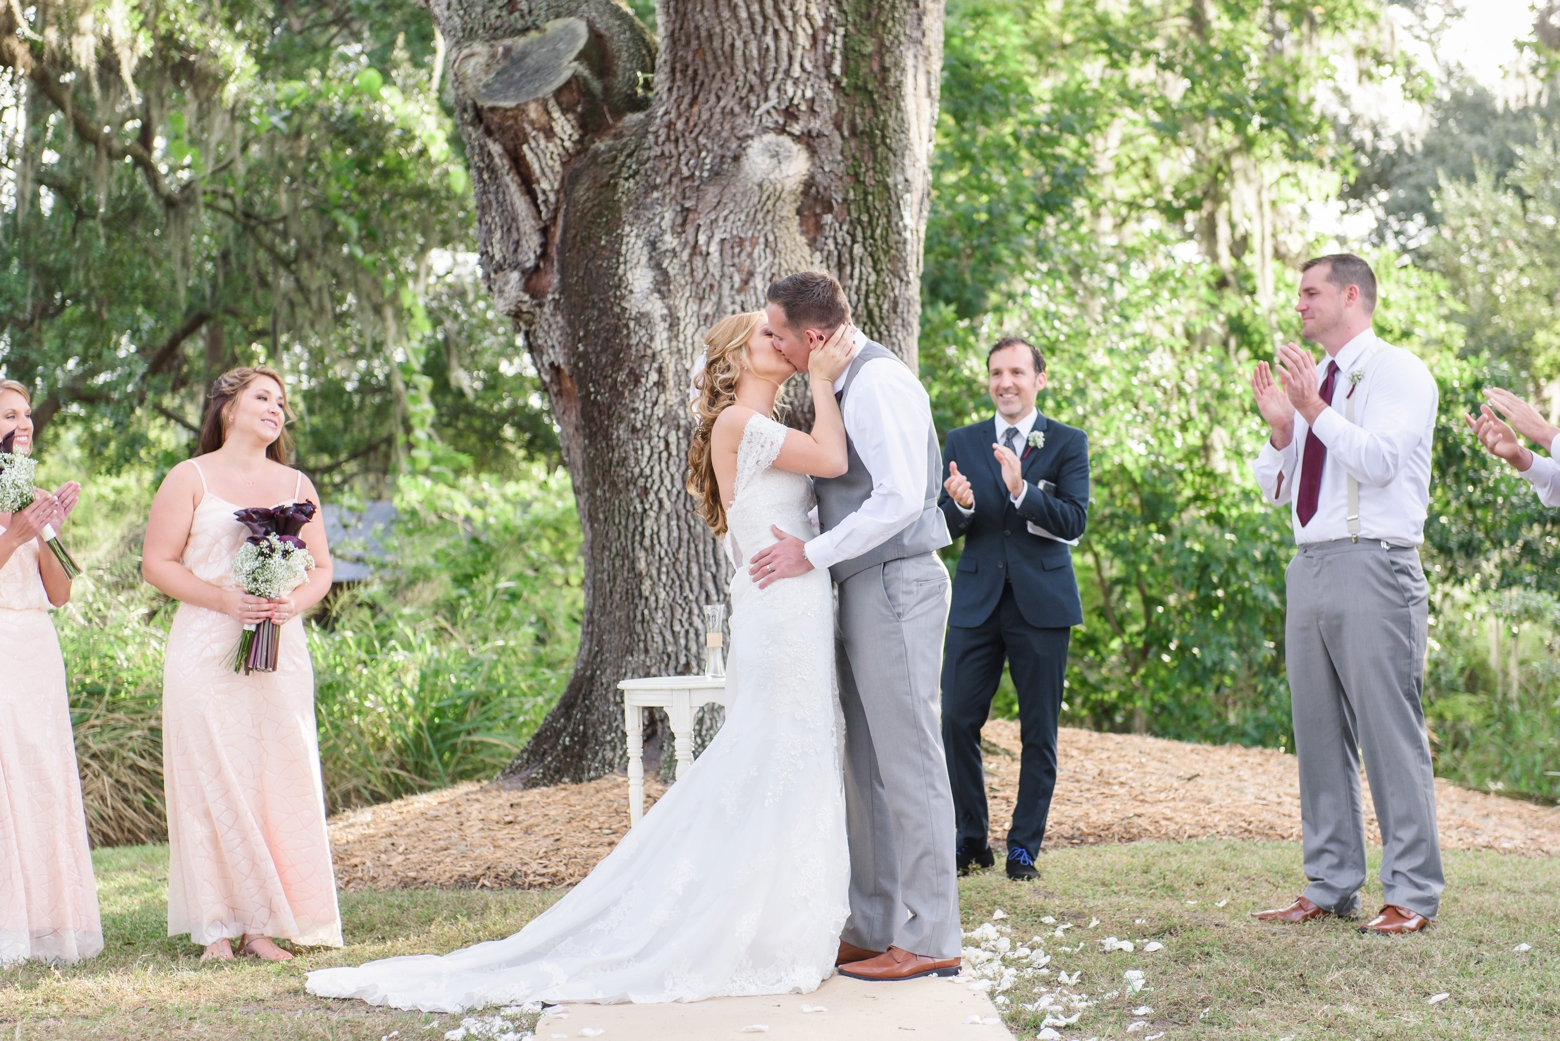 The first kiss as Husband and Wife on their Cross Creek Ranch Wedding day